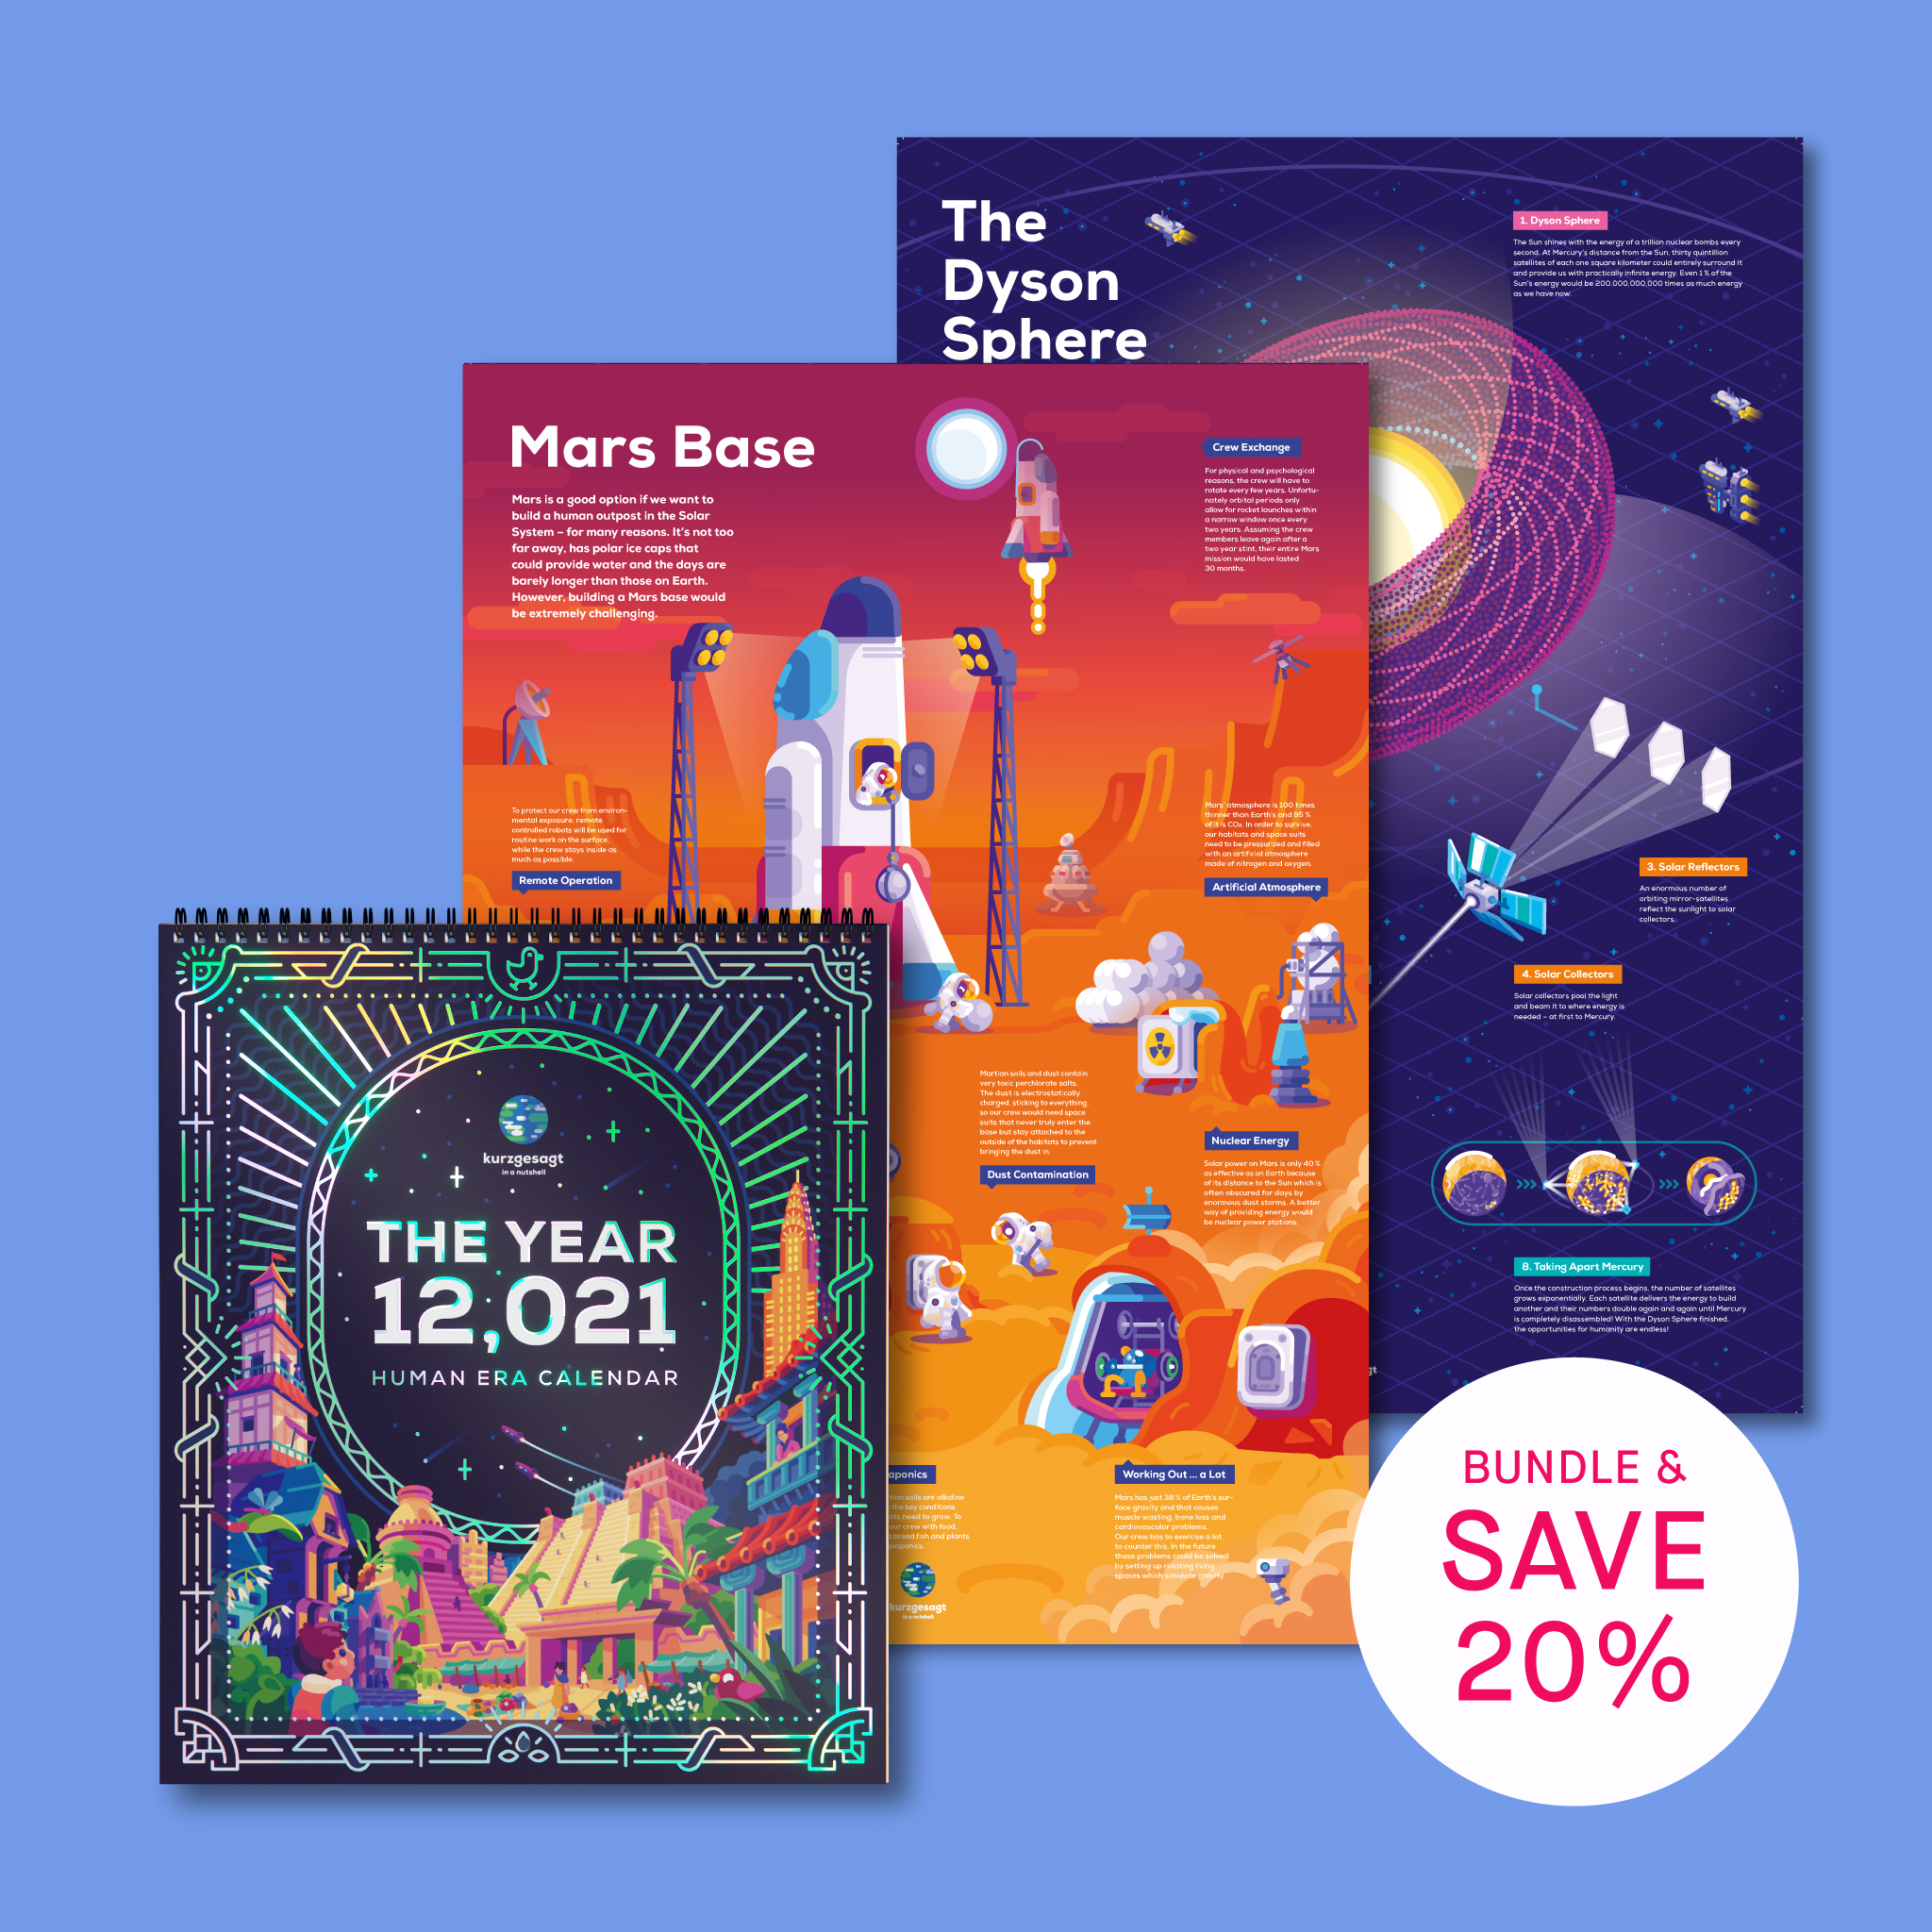 Kurzgesagt on Twitter: "The 12,021 Human Era Calendar is Out Now! you want to calendar with a Hoodie, infographic poster or plushie - we've made few deals for